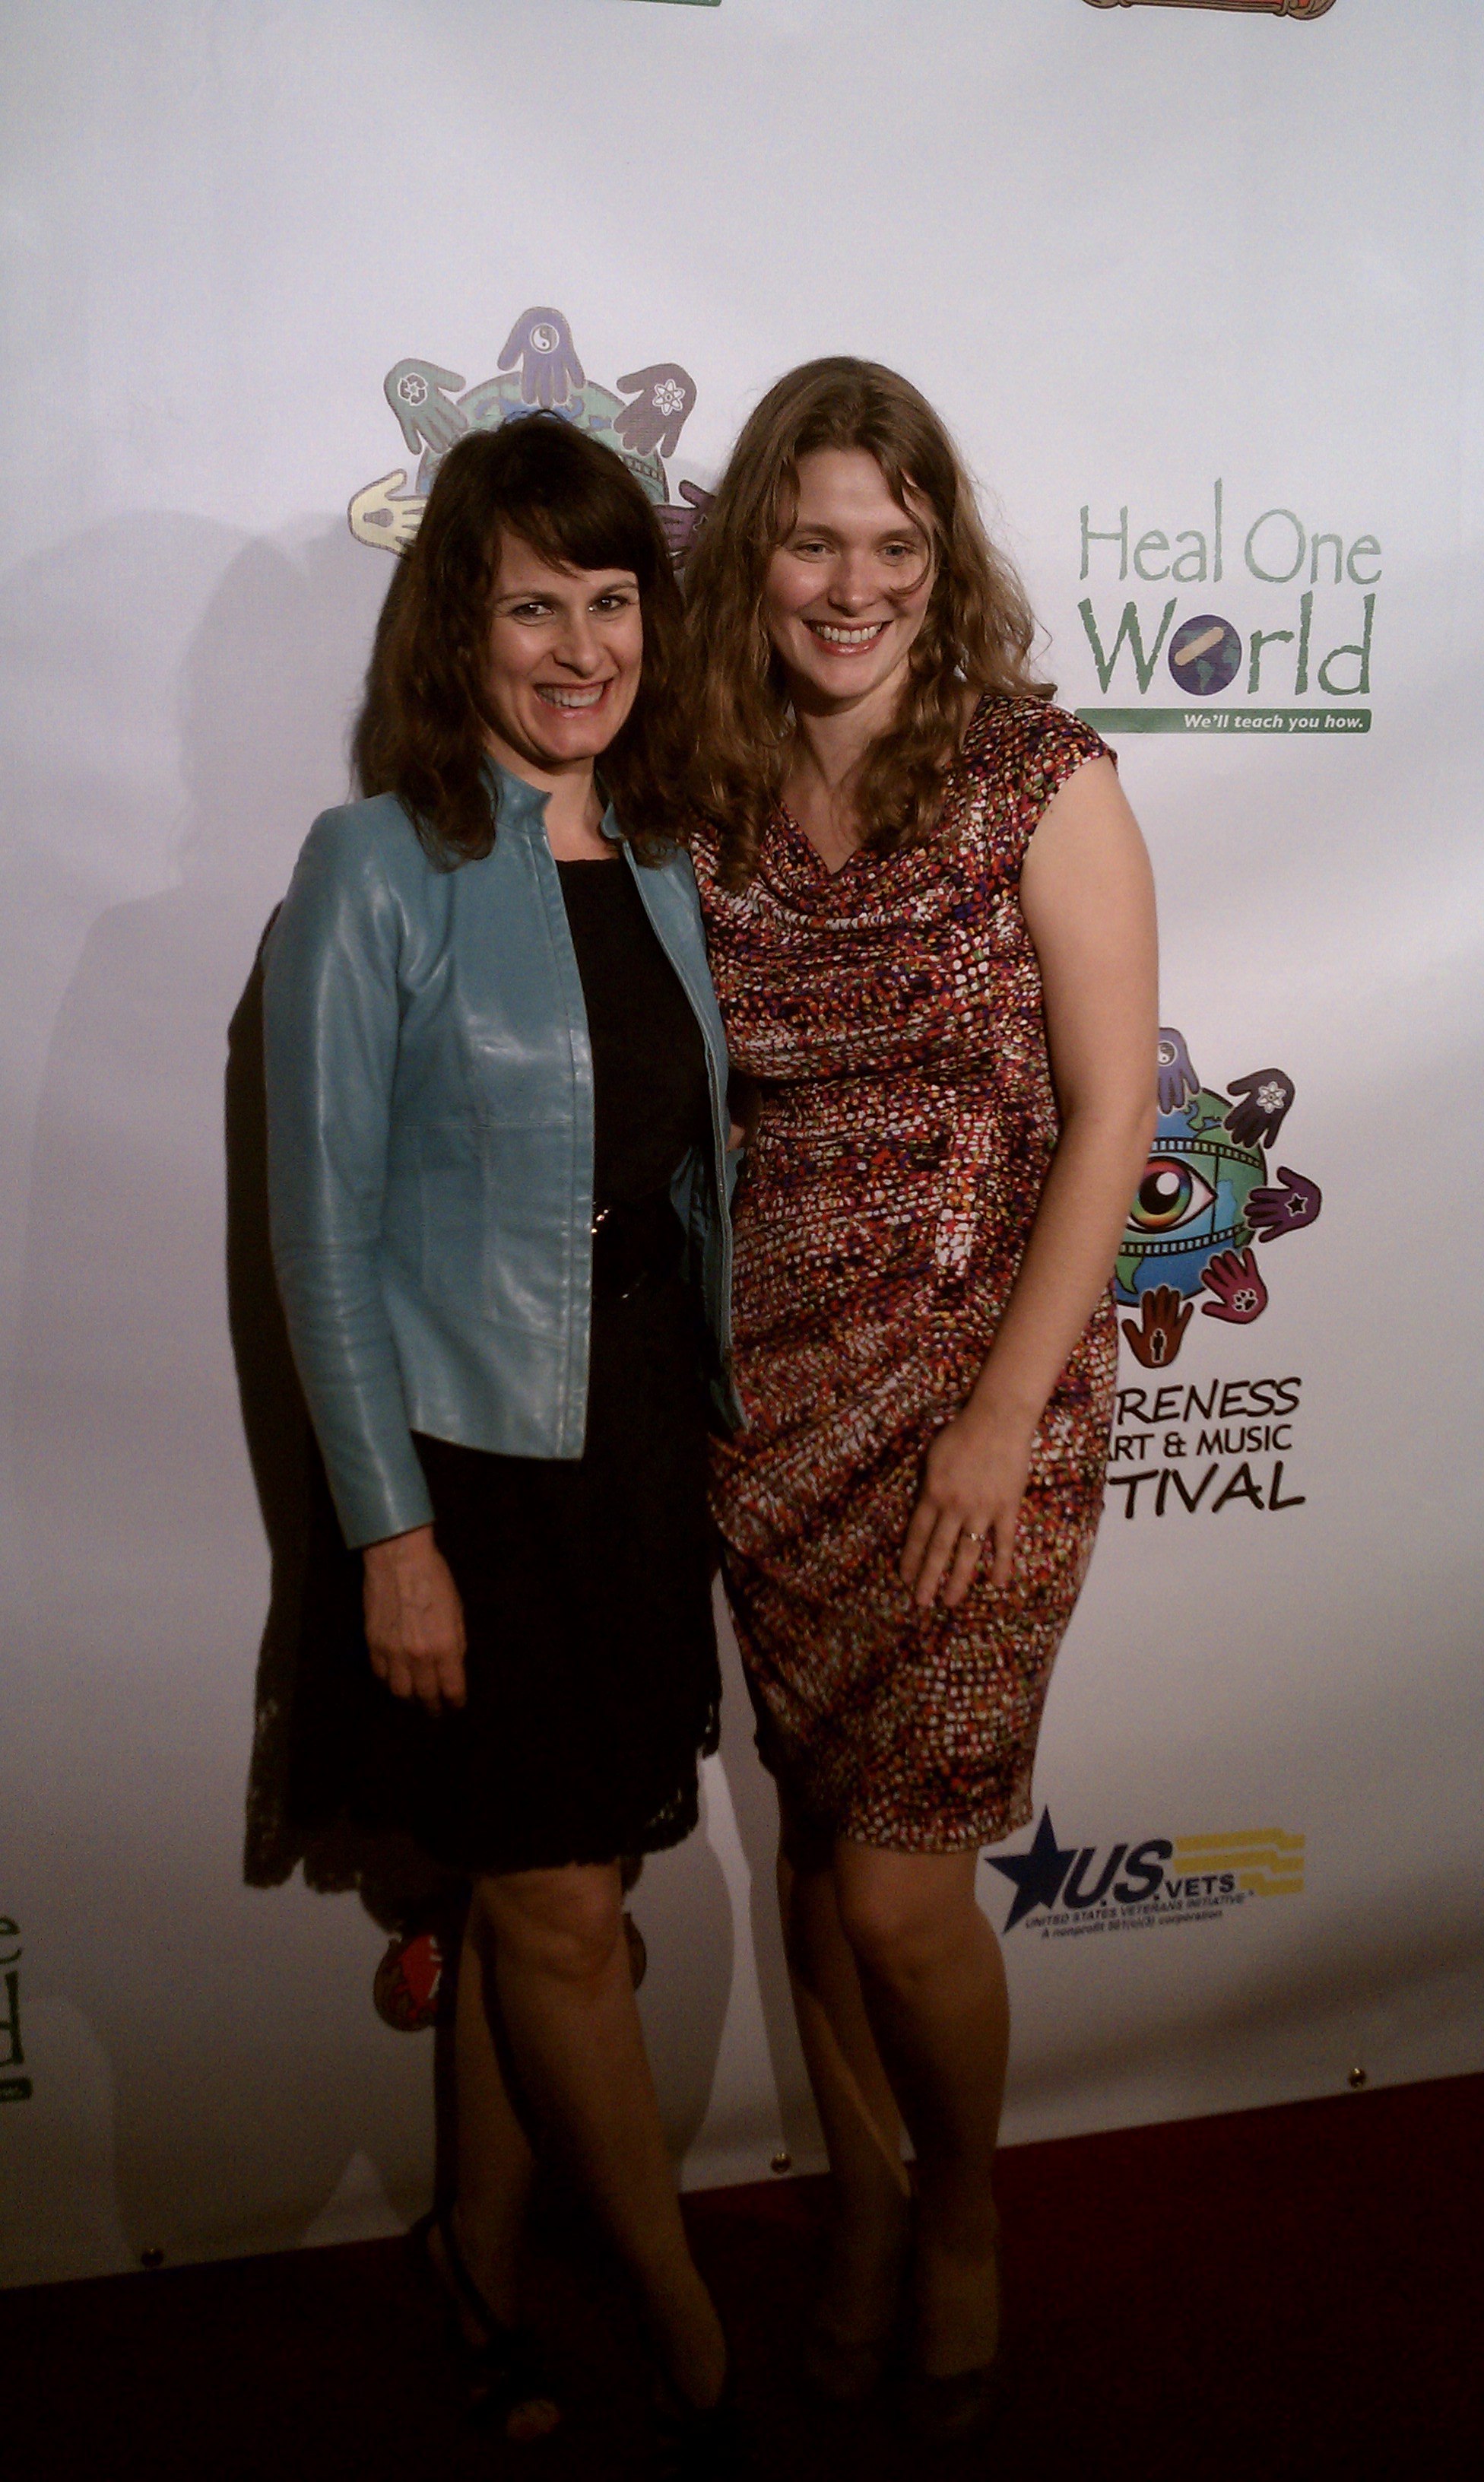 At 2012 Awareness Film Festival, Hollywood. Producer on documentary You Look A Lot Like Me.